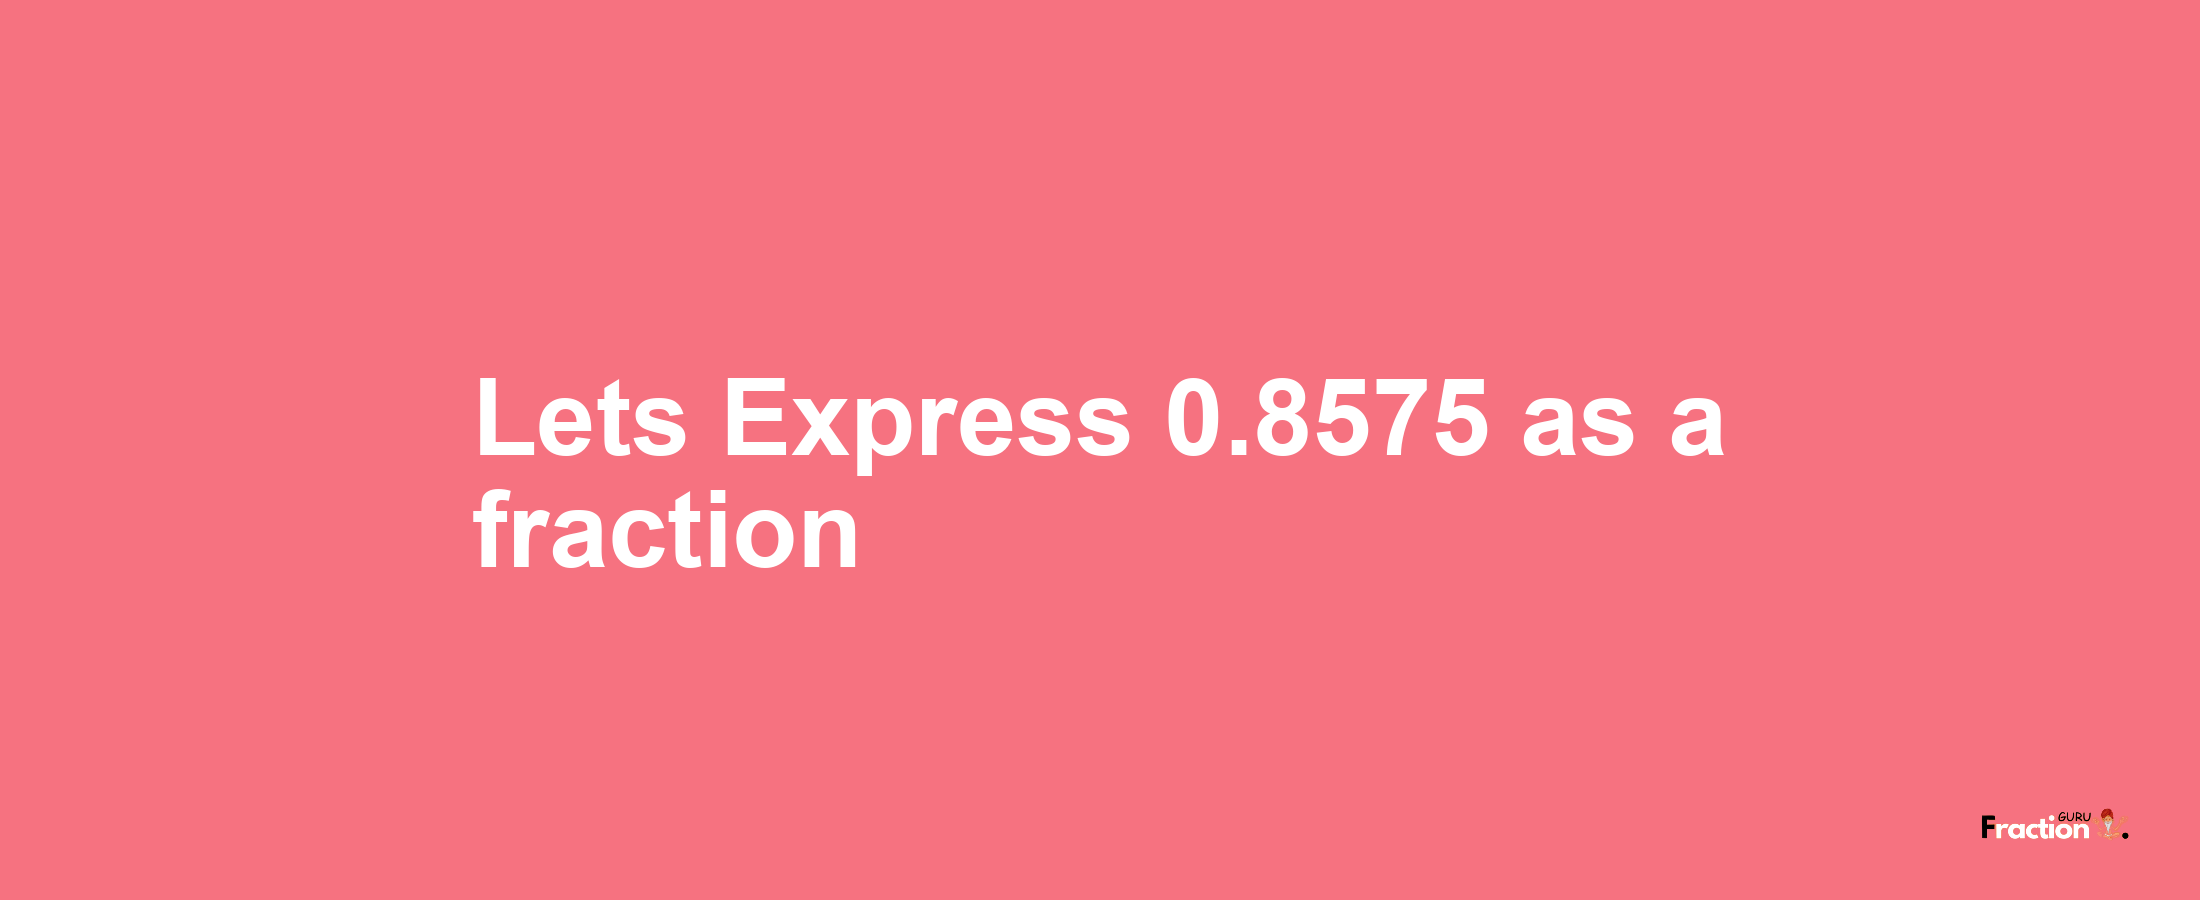 Lets Express 0.8575 as afraction